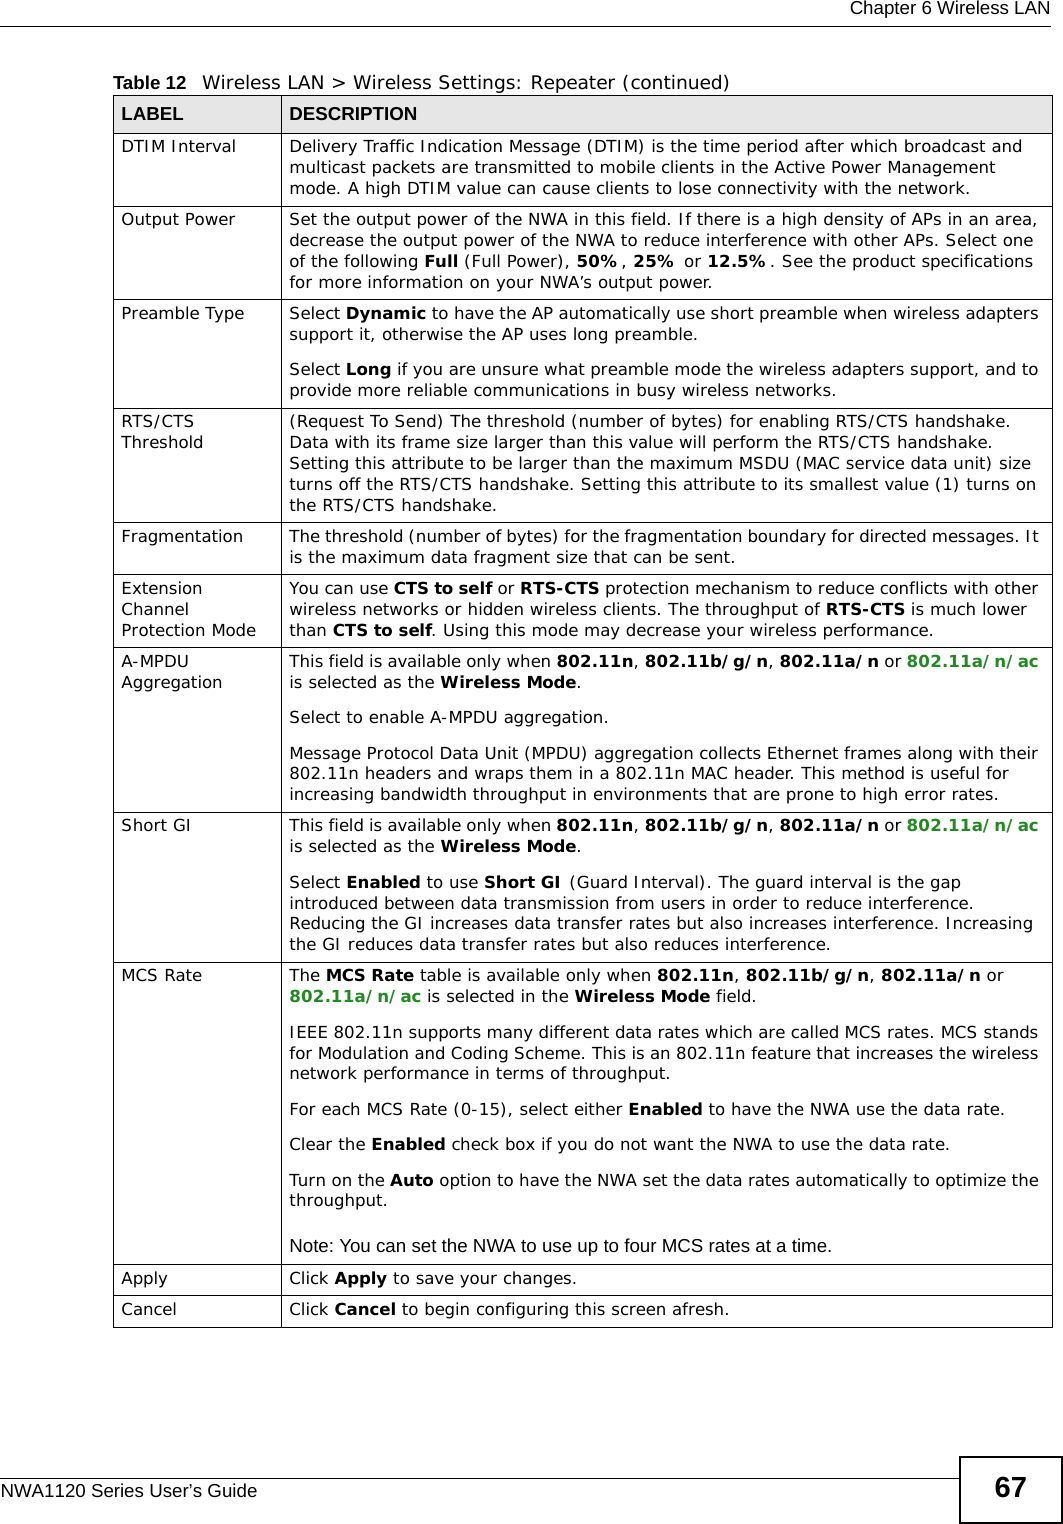  Chapter 6 Wireless LANNWA1120 Series User’s Guide 67DTIM Interval Delivery Traffic Indication Message (DTIM) is the time period after which broadcast and multicast packets are transmitted to mobile clients in the Active Power Management mode. A high DTIM value can cause clients to lose connectivity with the network. Output Power  Set the output power of the NWA in this field. If there is a high density of APs in an area, decrease the output power of the NWA to reduce interference with other APs. Select one of the following Full (Full Power), 50%, 25% or 12.5%. See the product specifications for more information on your NWA’s output power.Preamble Type Select Dynamic to have the AP automatically use short preamble when wireless adapters support it, otherwise the AP uses long preamble.Select Long if you are unsure what preamble mode the wireless adapters support, and to provide more reliable communications in busy wireless networks. RTS/CTS Threshold (Request To Send) The threshold (number of bytes) for enabling RTS/CTS handshake. Data with its frame size larger than this value will perform the RTS/CTS handshake. Setting this attribute to be larger than the maximum MSDU (MAC service data unit) size turns off the RTS/CTS handshake. Setting this attribute to its smallest value (1) turns on the RTS/CTS handshake. Fragmentation The threshold (number of bytes) for the fragmentation boundary for directed messages. It is the maximum data fragment size that can be sent.Extension Channel Protection ModeYou can use CTS to self or RTS-CTS protection mechanism to reduce conflicts with other wireless networks or hidden wireless clients. The throughput of RTS-CTS is much lower than CTS to self. Using this mode may decrease your wireless performance.A-MPDU Aggregation  This field is available only when 802.11n, 802.11b/g/n, 802.11a/n or 802.11a/n/ac is selected as the Wireless Mode. Select to enable A-MPDU aggregation.Message Protocol Data Unit (MPDU) aggregation collects Ethernet frames along with their 802.11n headers and wraps them in a 802.11n MAC header. This method is useful for increasing bandwidth throughput in environments that are prone to high error rates.Short GI  This field is available only when 802.11n, 802.11b/g/n, 802.11a/n or 802.11a/n/ac is selected as the Wireless Mode.  Select Enabled to use Short GI (Guard Interval). The guard interval is the gap introduced between data transmission from users in order to reduce interference. Reducing the GI increases data transfer rates but also increases interference. Increasing the GI reduces data transfer rates but also reduces interference.MCS Rate The MCS Rate table is available only when 802.11n, 802.11b/g/n, 802.11a/n or 802.11a/n/ac is selected in the Wireless Mode field.IEEE 802.11n supports many different data rates which are called MCS rates. MCS stands for Modulation and Coding Scheme. This is an 802.11n feature that increases the wireless network performance in terms of throughput. For each MCS Rate (0-15), select either Enabled to have the NWA use the data rate. Clear the Enabled check box if you do not want the NWA to use the data rate. Turn on the Auto option to have the NWA set the data rates automatically to optimize the throughput.Note: You can set the NWA to use up to four MCS rates at a time.Apply Click Apply to save your changes.Cancel Click Cancel to begin configuring this screen afresh.Table 12   Wireless LAN &gt; Wireless Settings: Repeater (continued)LABEL DESCRIPTION